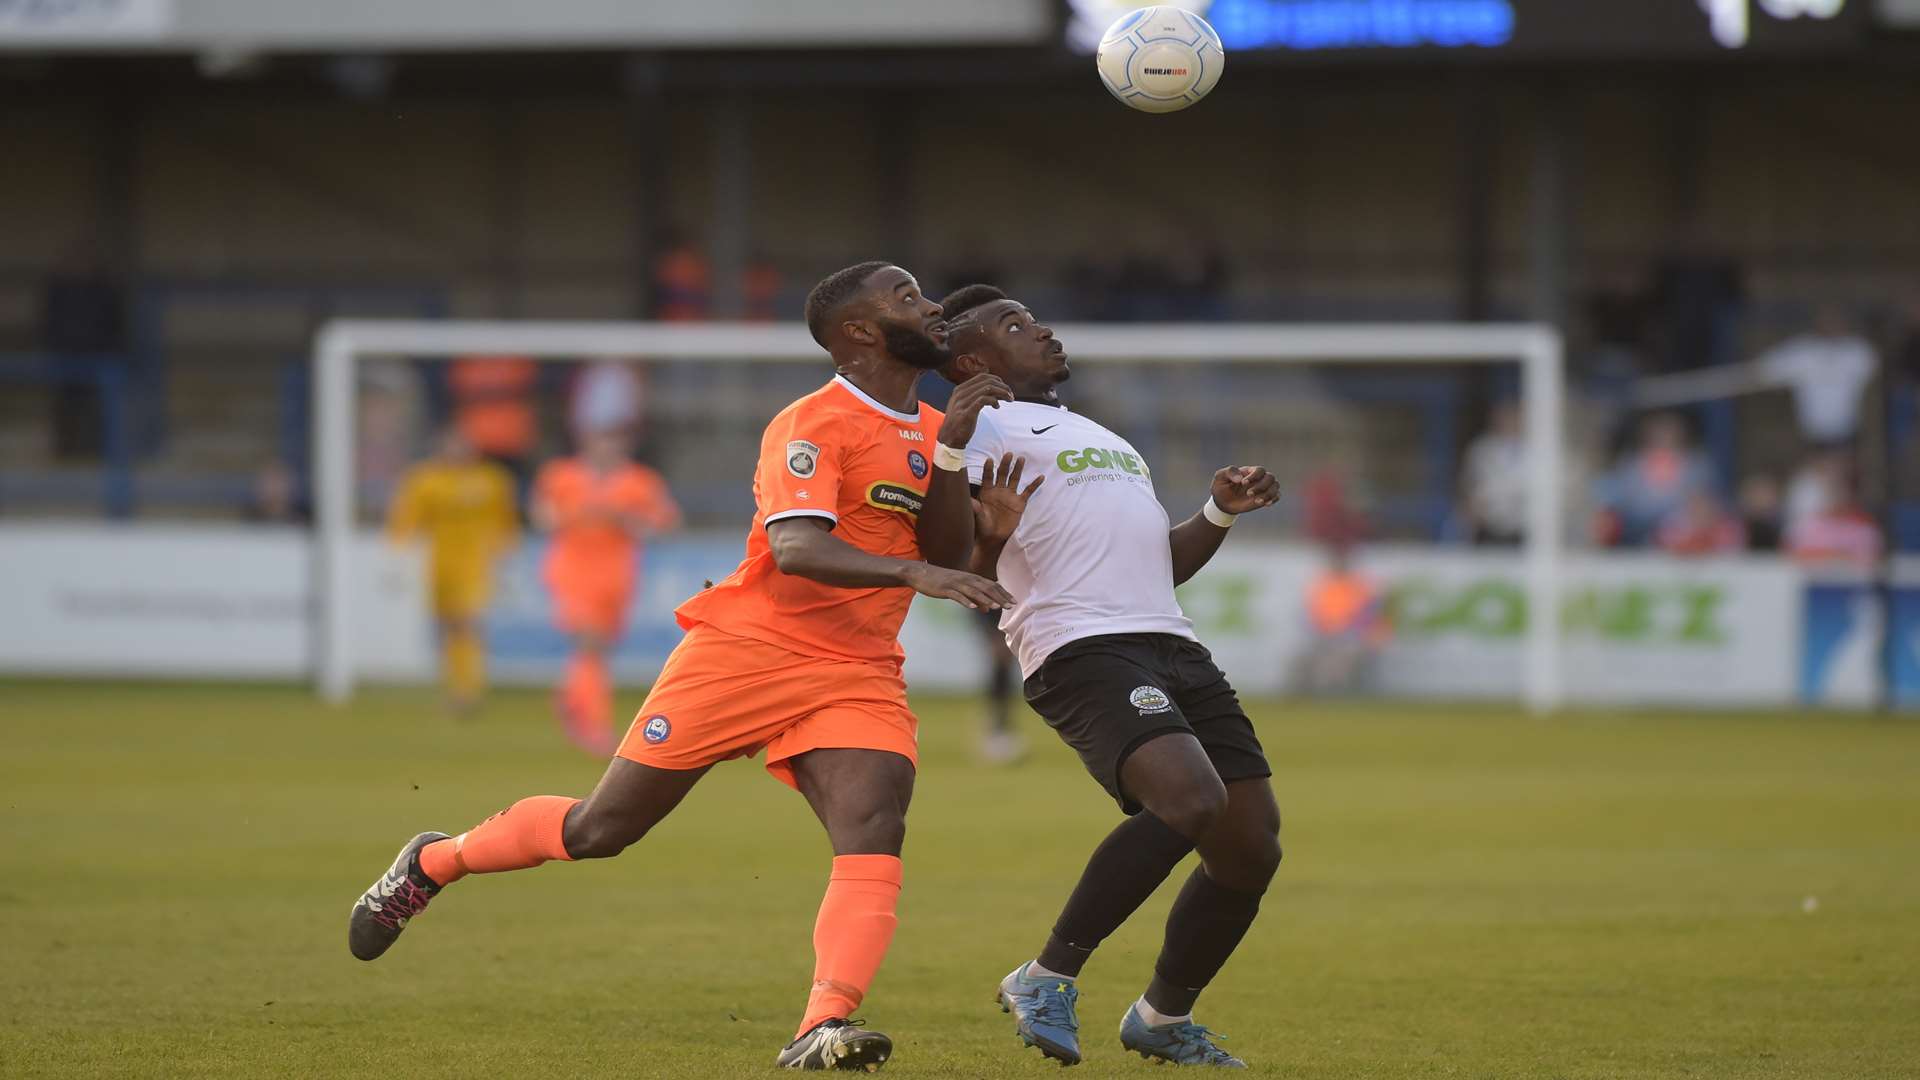 Ira Jackson (right) watches a high ball during the game against Braintree Picture: Tony Flashman